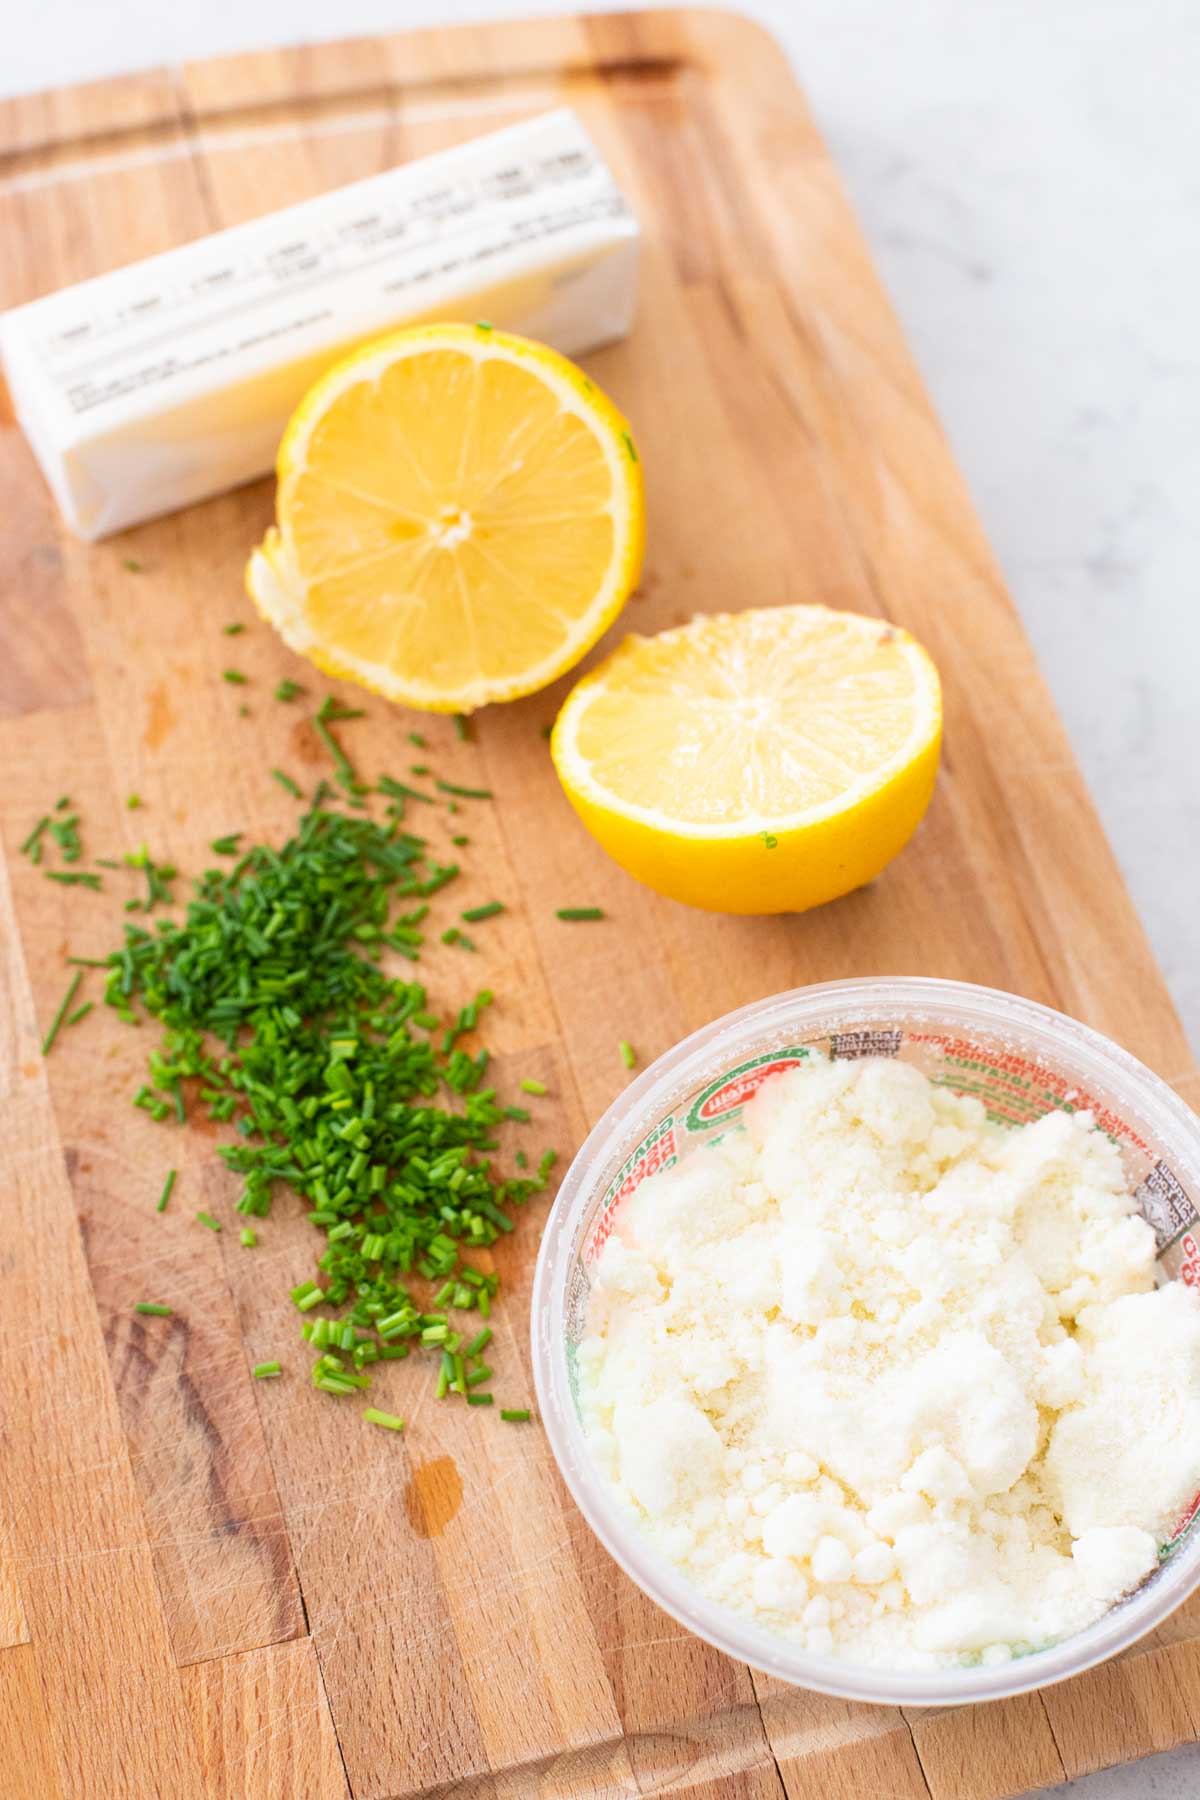 The fresh lemon, grated cheese, and fresh chives are on a cutting board with a stick of butter.